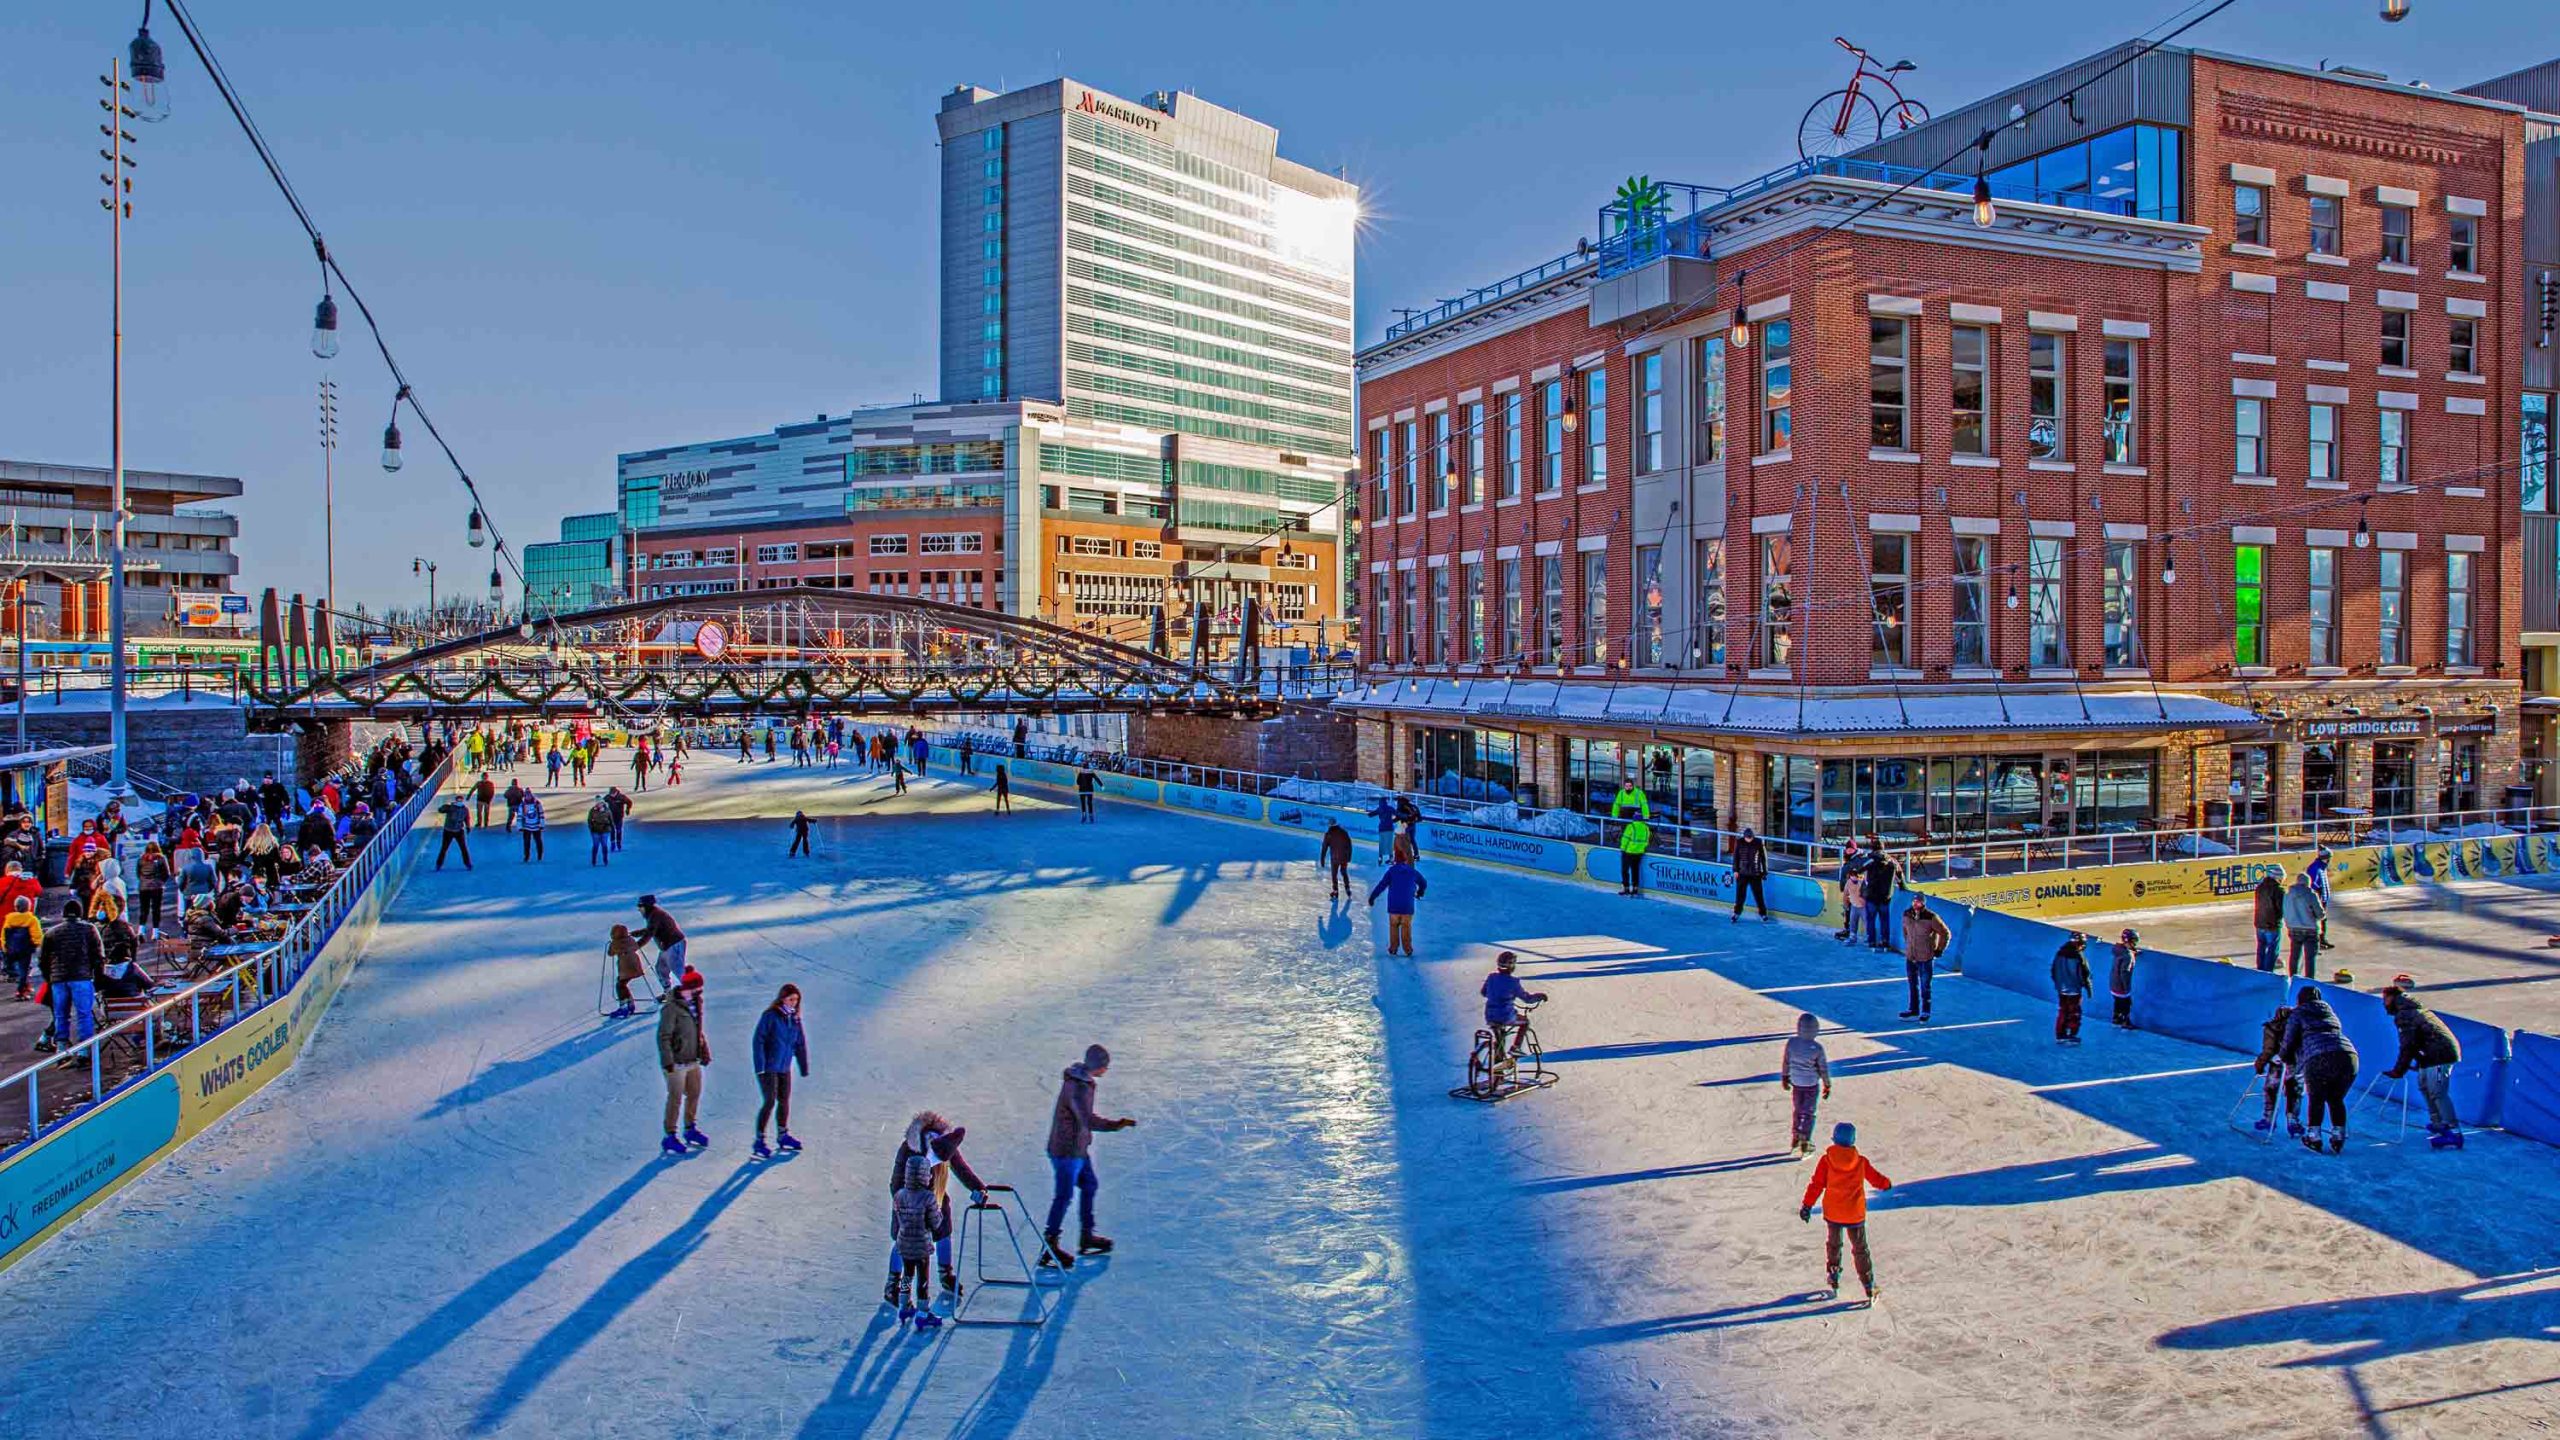 Ice-at-Canalside-Credit-to-Scott-Balzer-reduced